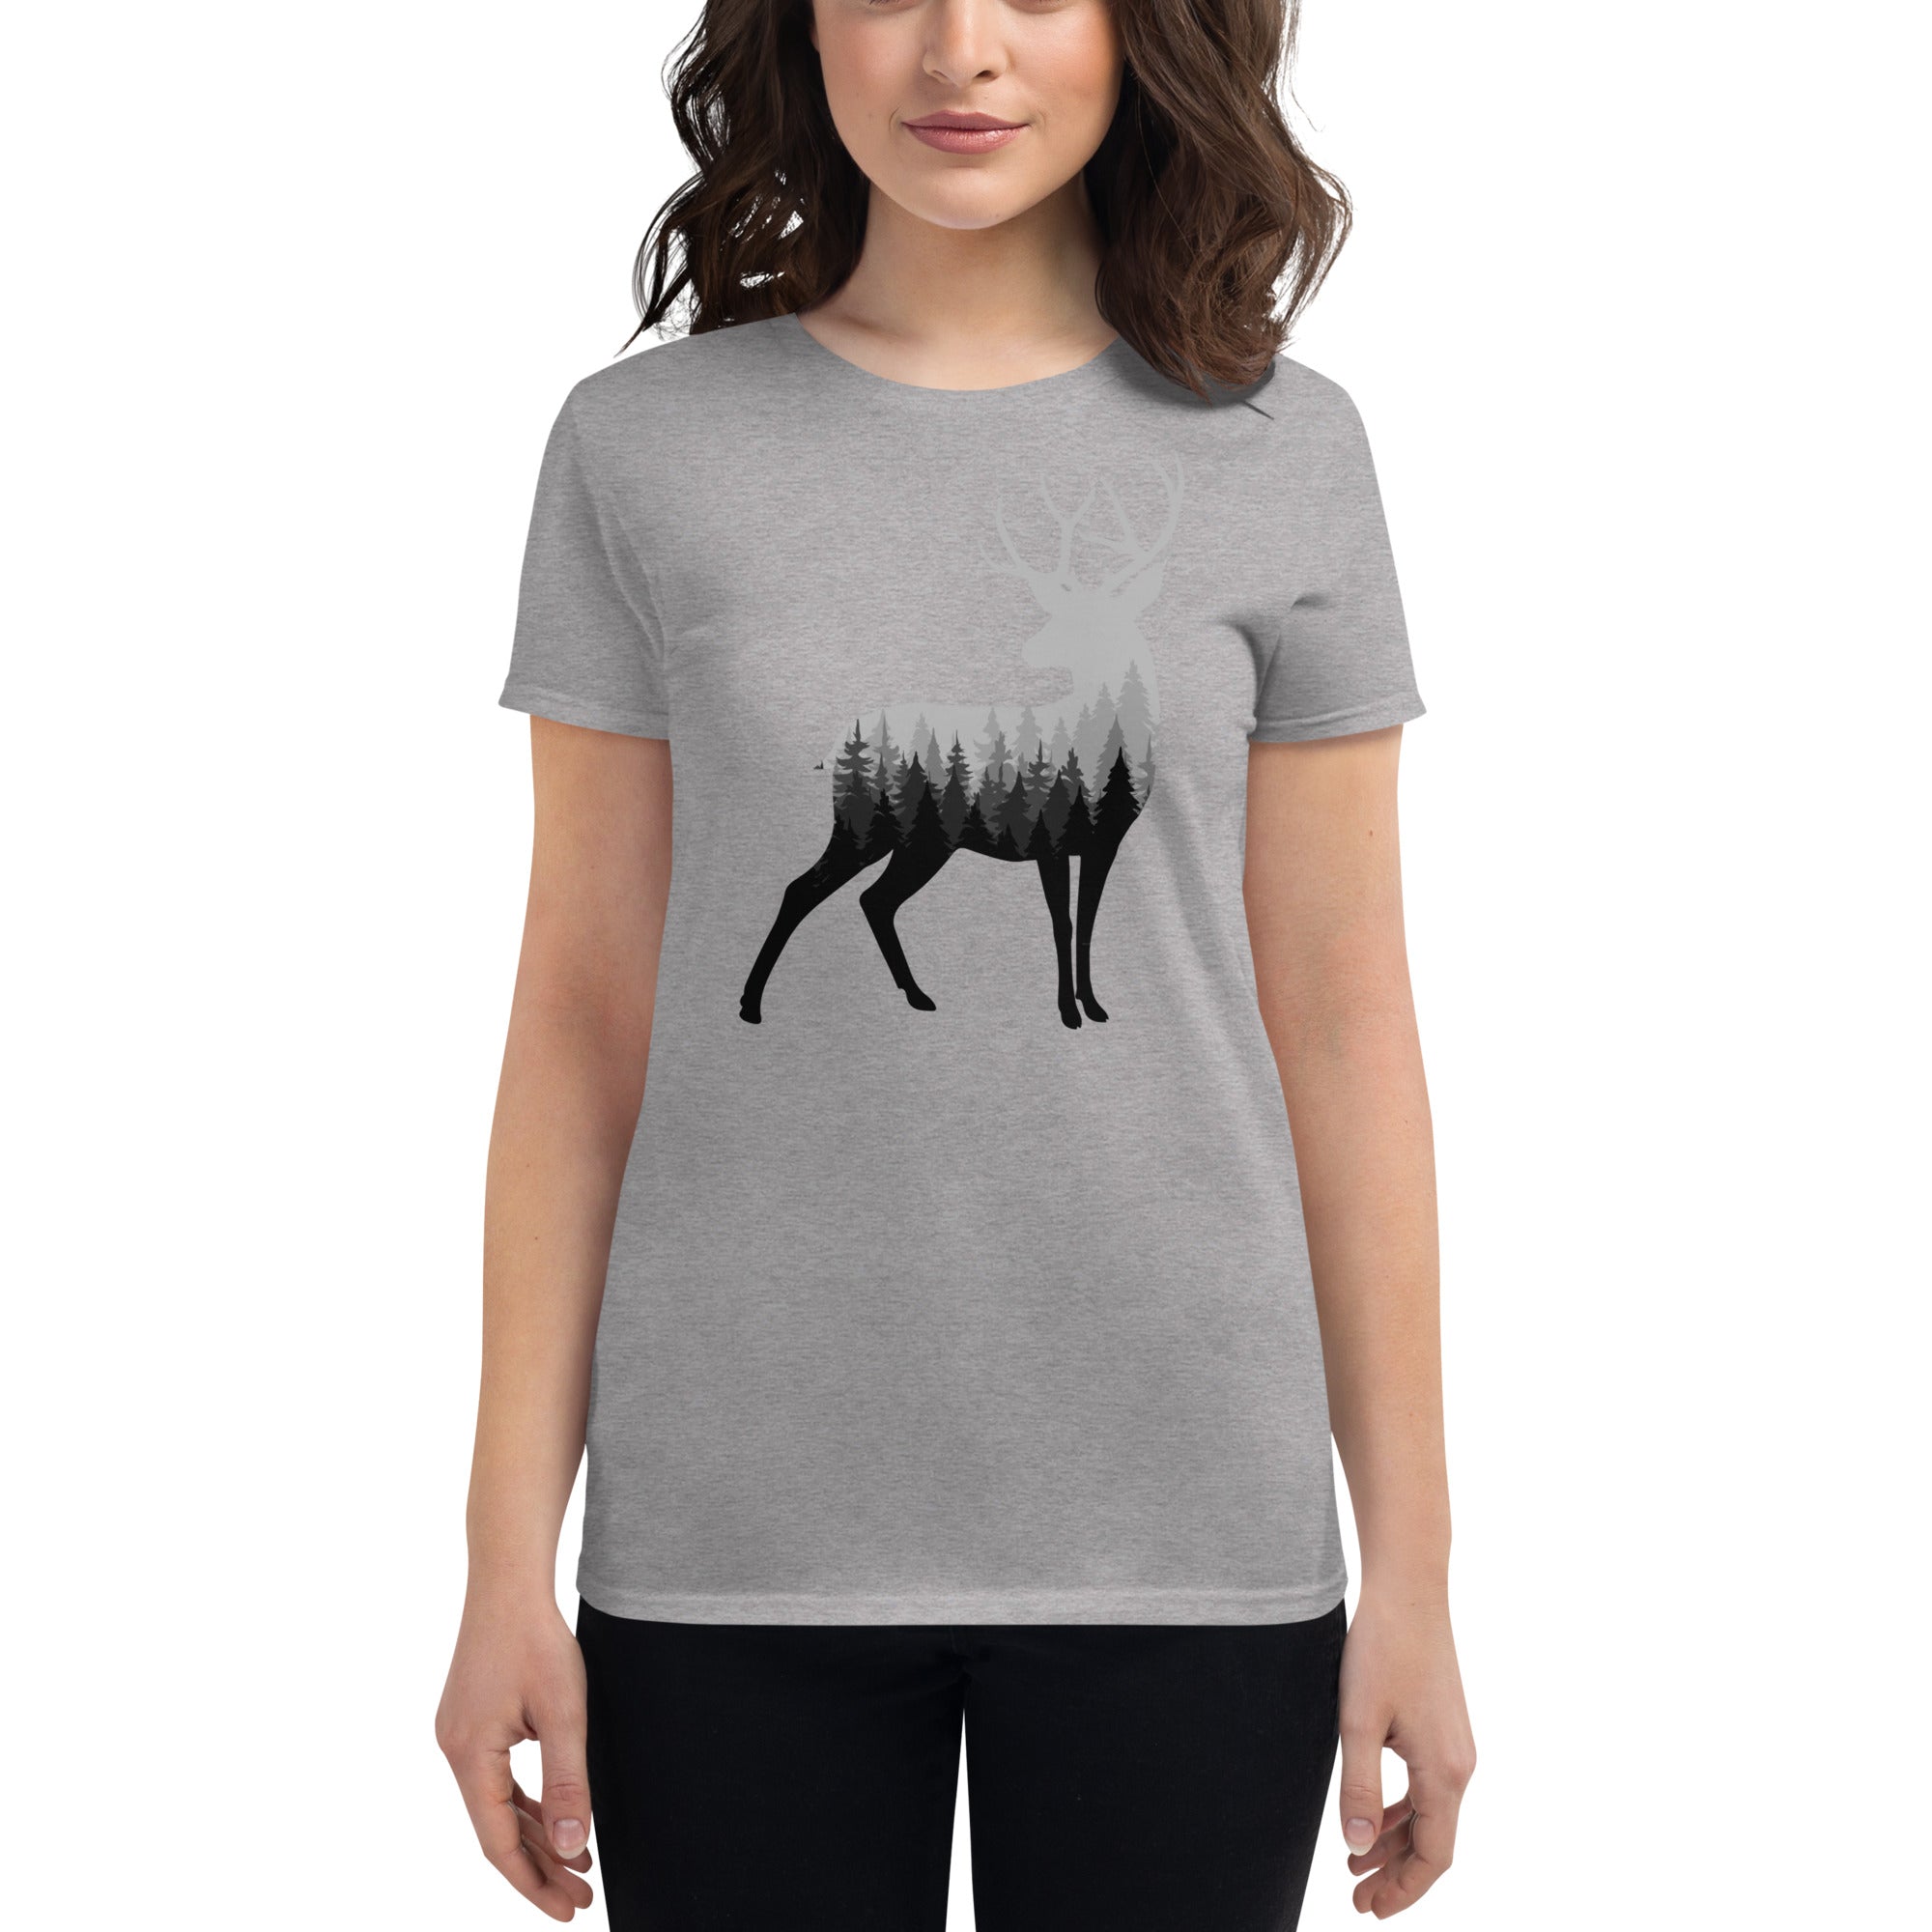 Buck n' Trees Women's Fitted T-Shirt